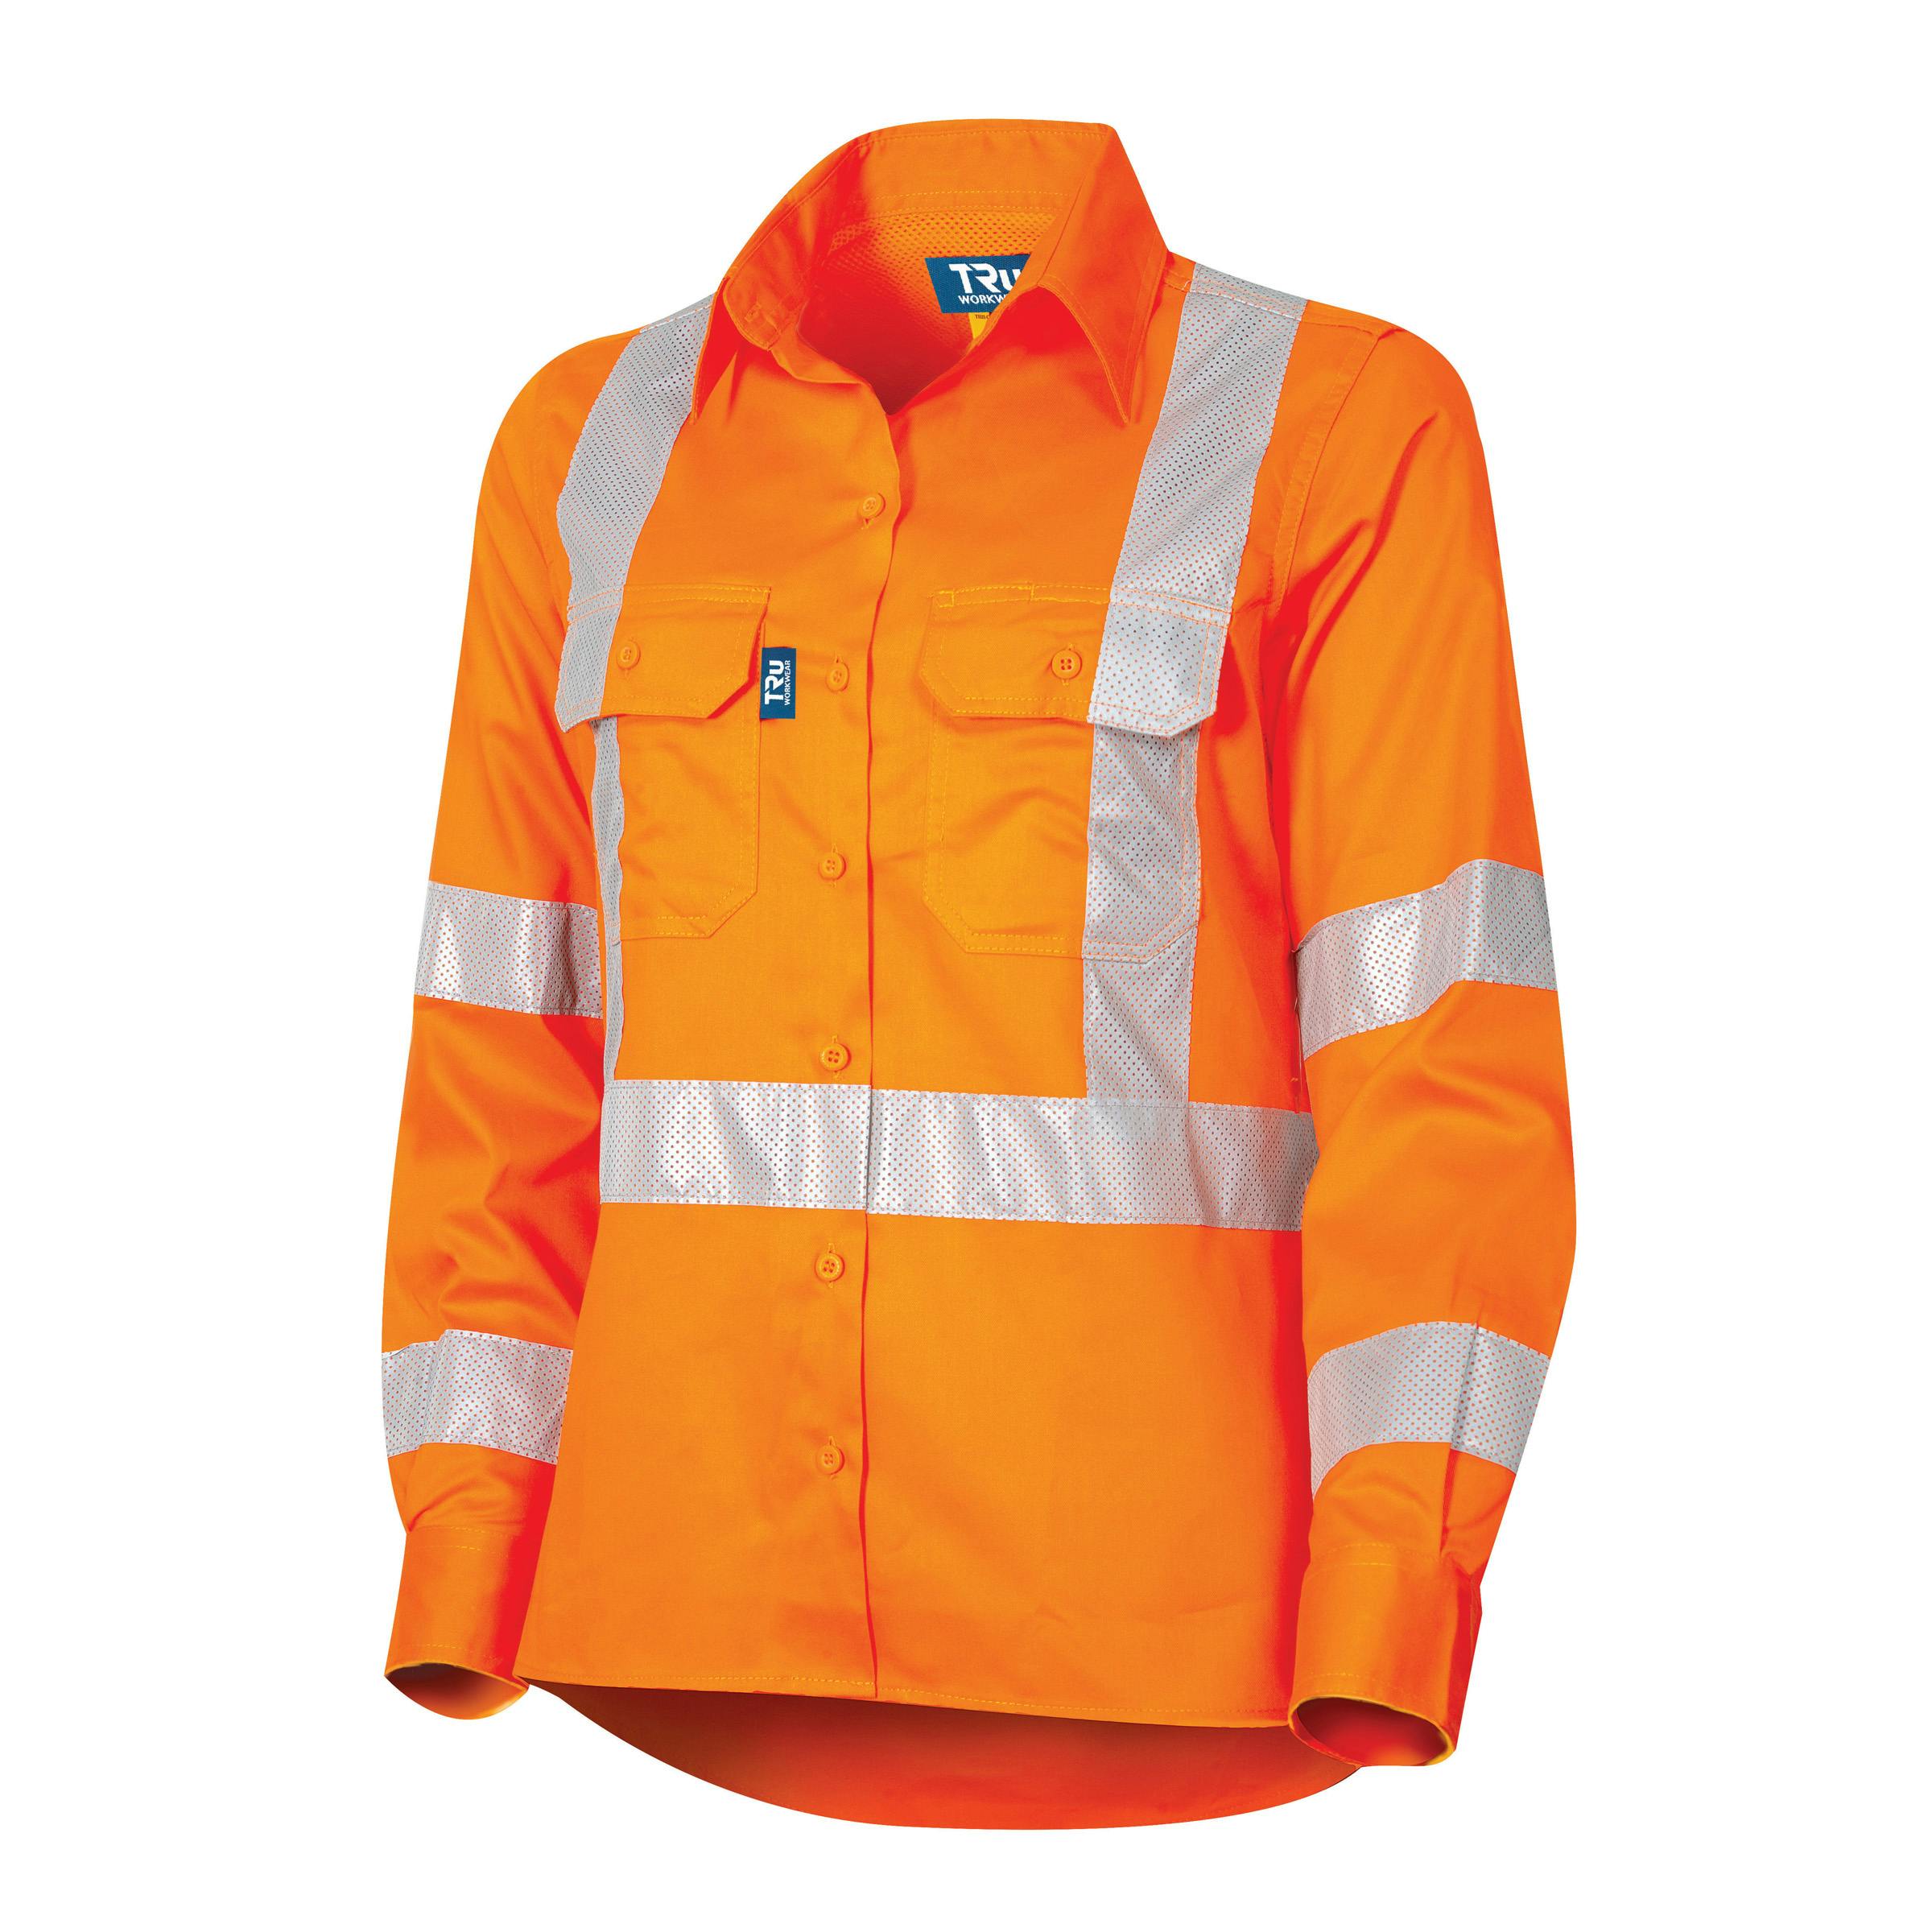 TRu Workwear Shirt Ladies 160gsm L/S Cotton Drill With Horizontal Cooling Vents And CSR Perforated Bio- Motion 'H' Front, 'X' Back Reflective Tape